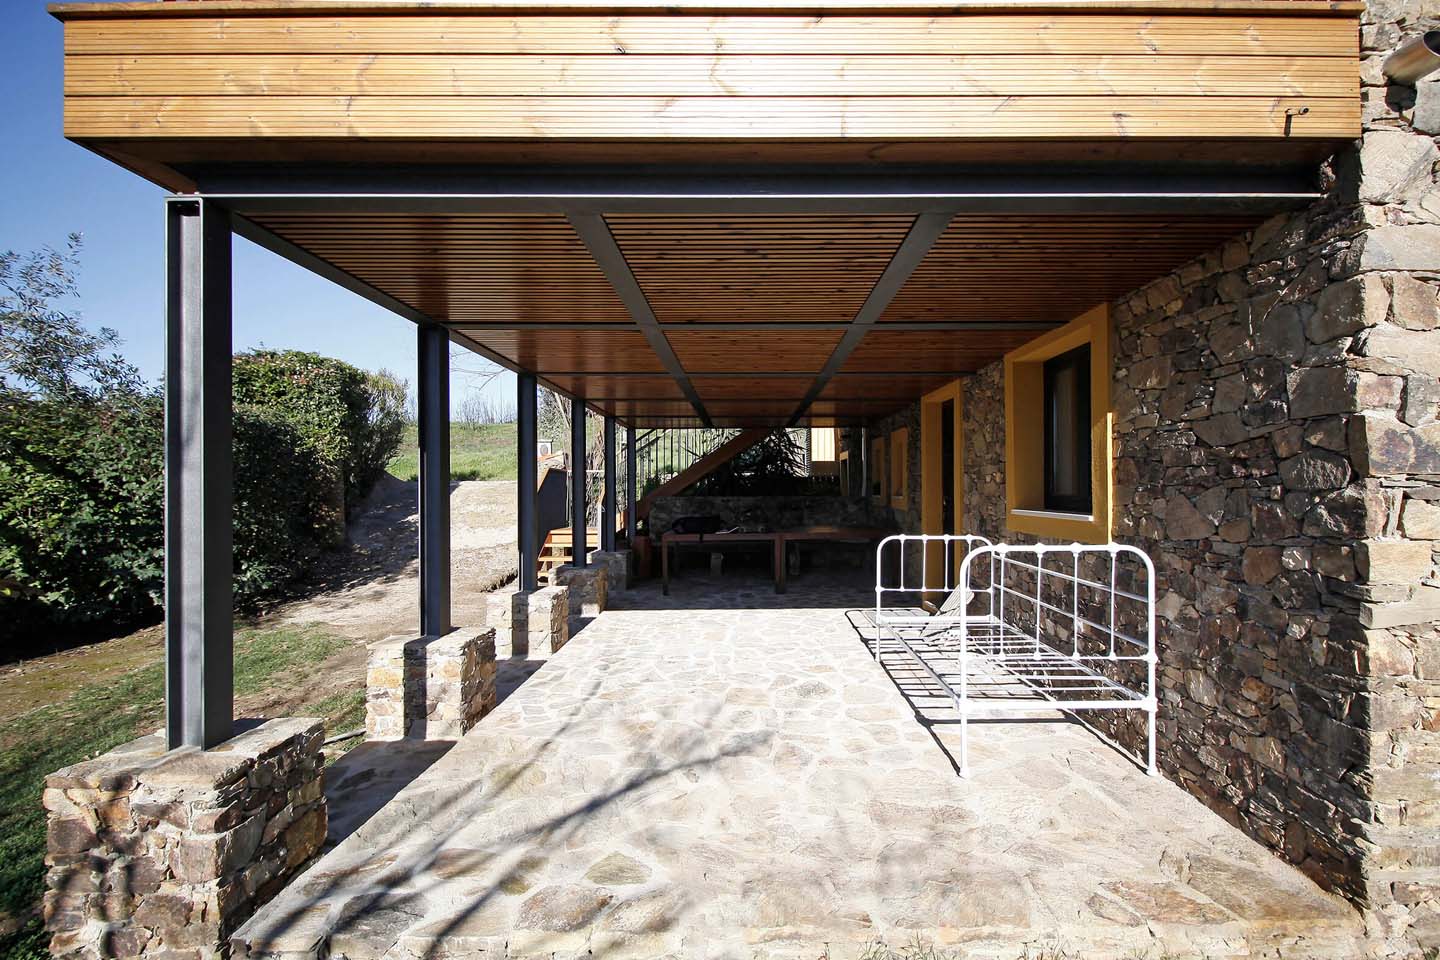 Extension of a Rural House